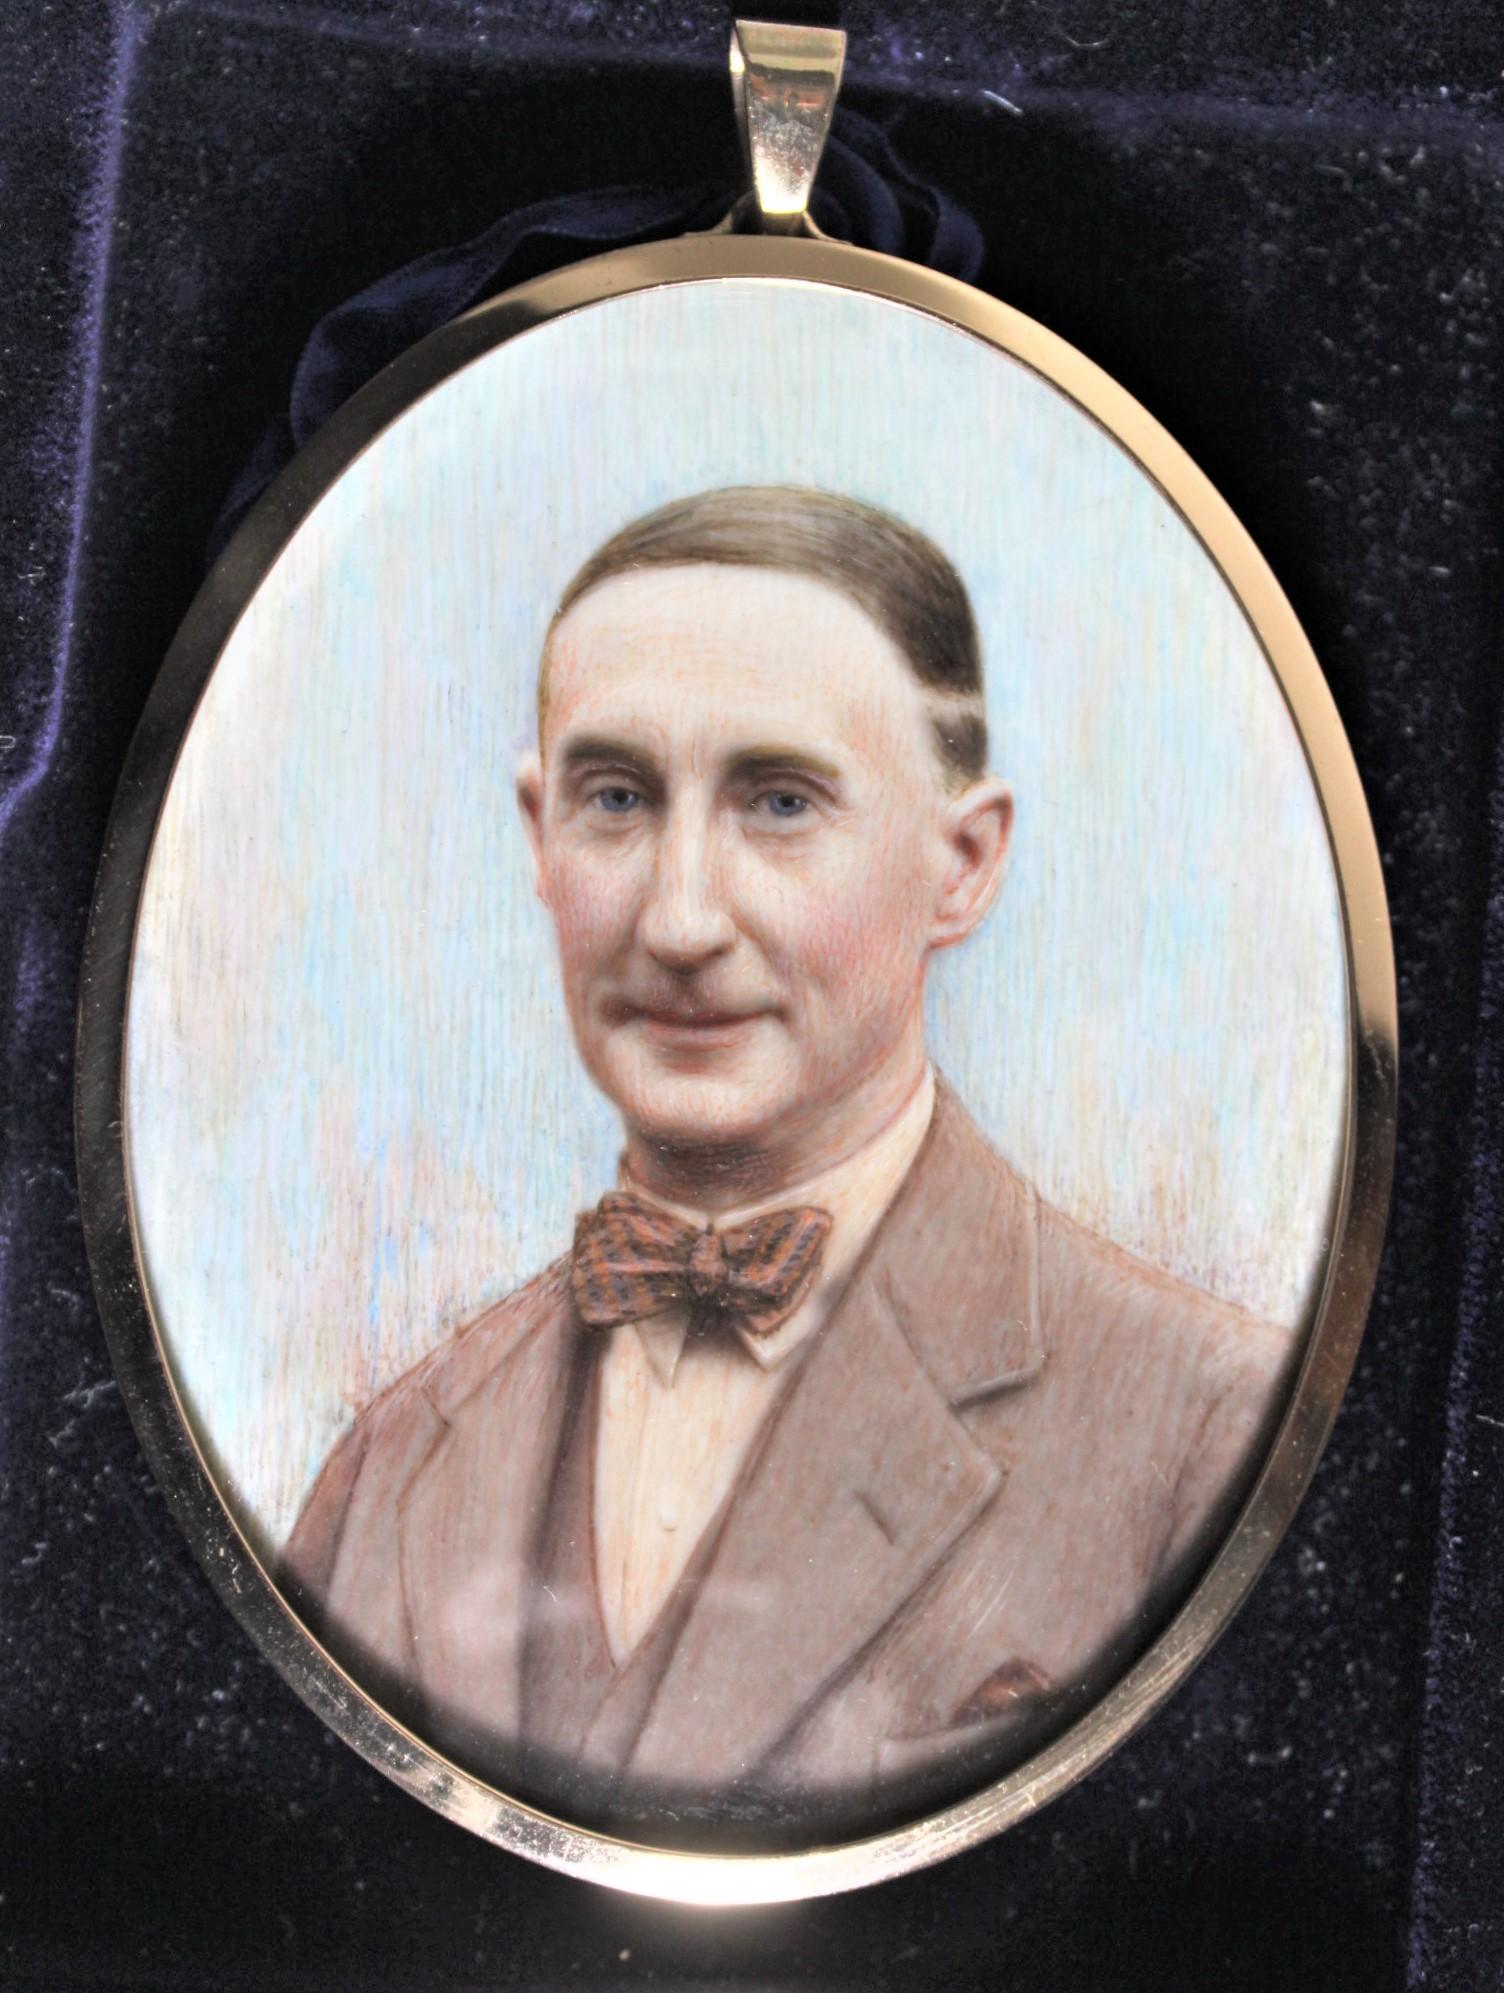 This well executed miniature portrait was made in England in approximately 1900 in the period Edwardian style and comes with its original fitted leather case. The painting is unsigned and there is no notation to identify the subject, but the